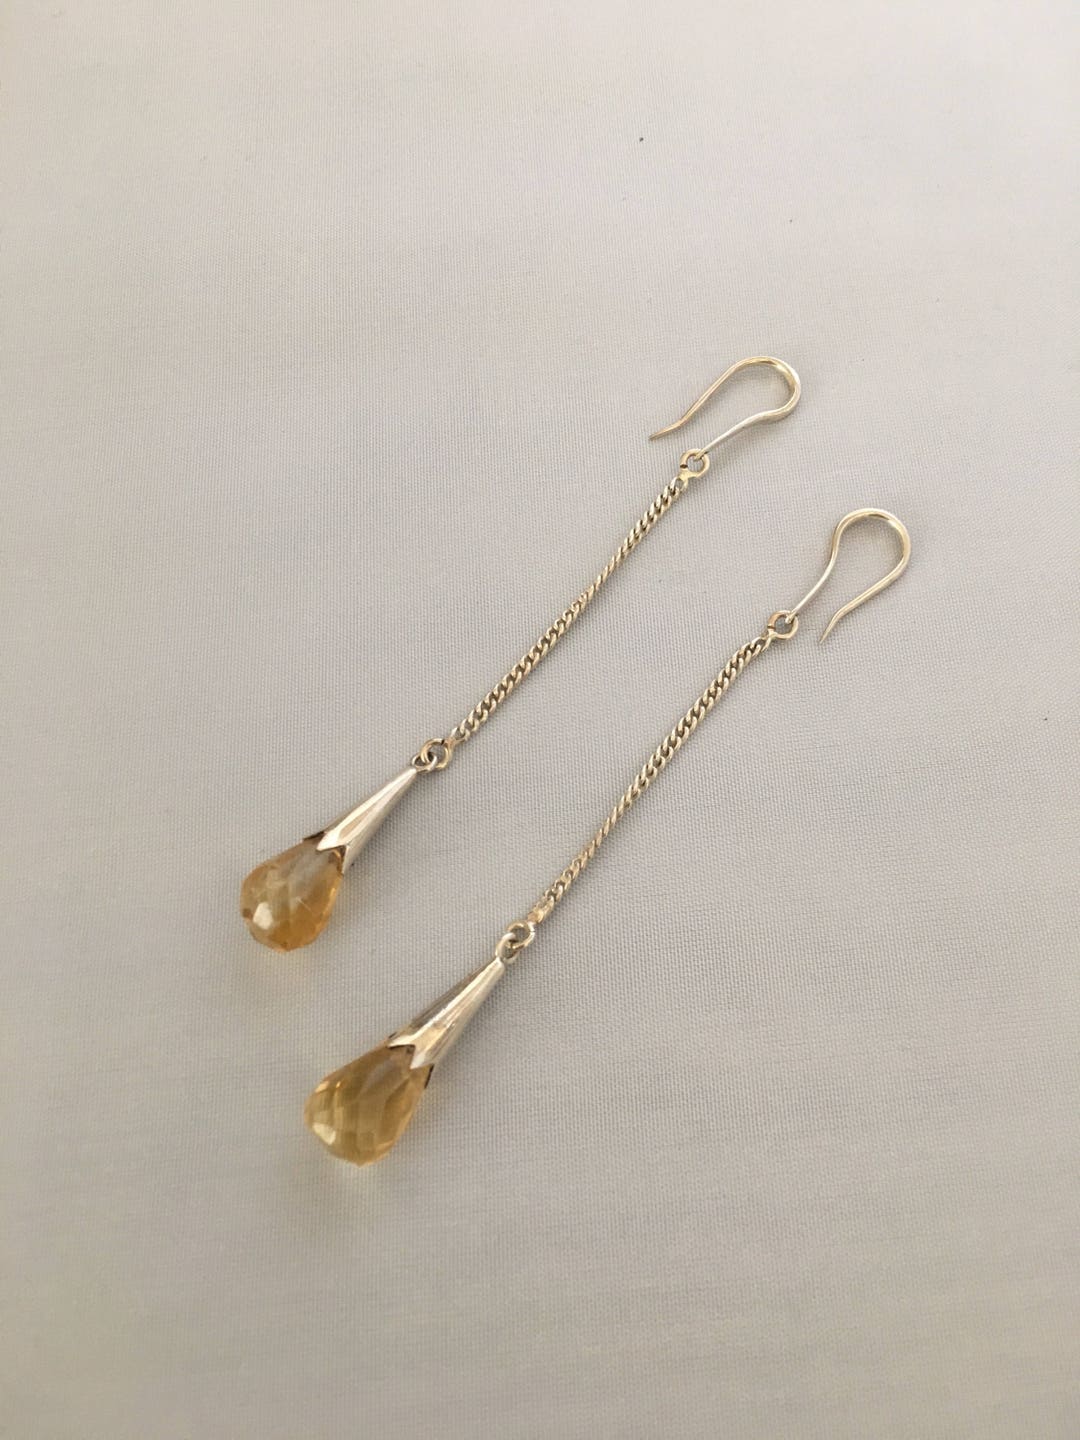 Silver and Citrine Earrings - Etsy